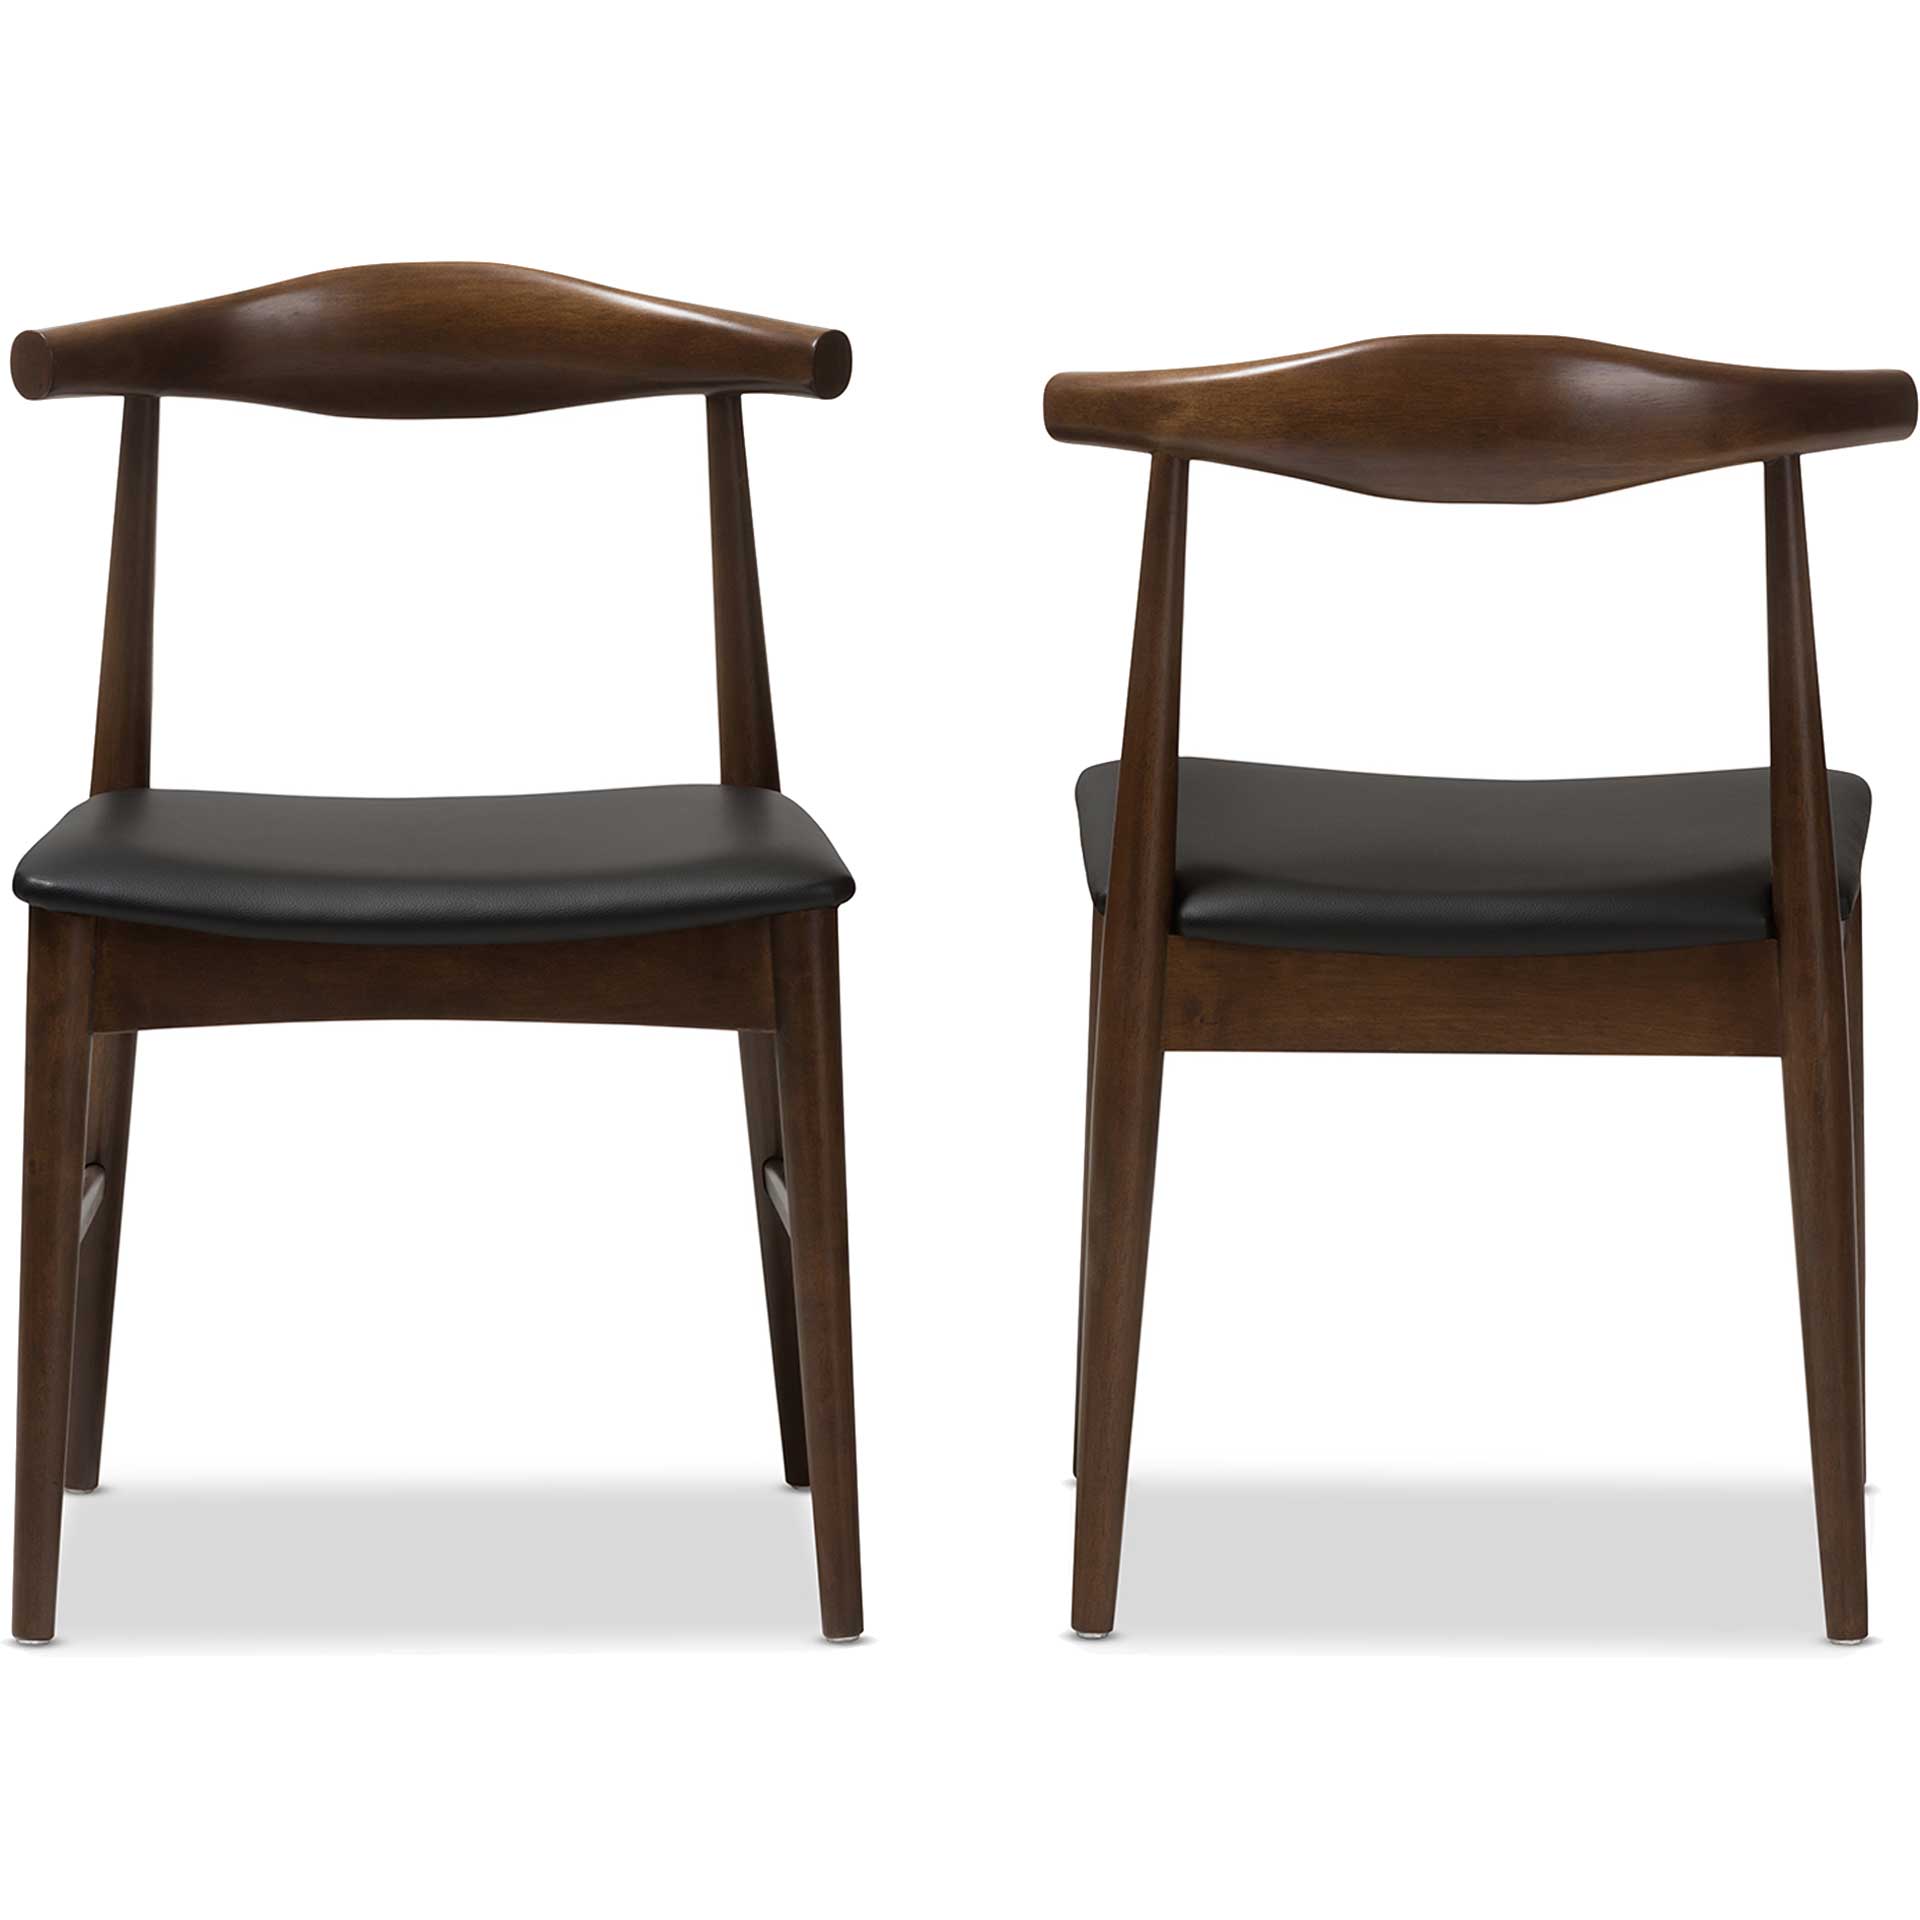 Wiley Dining Chair Black/Walnut (Set of 2)